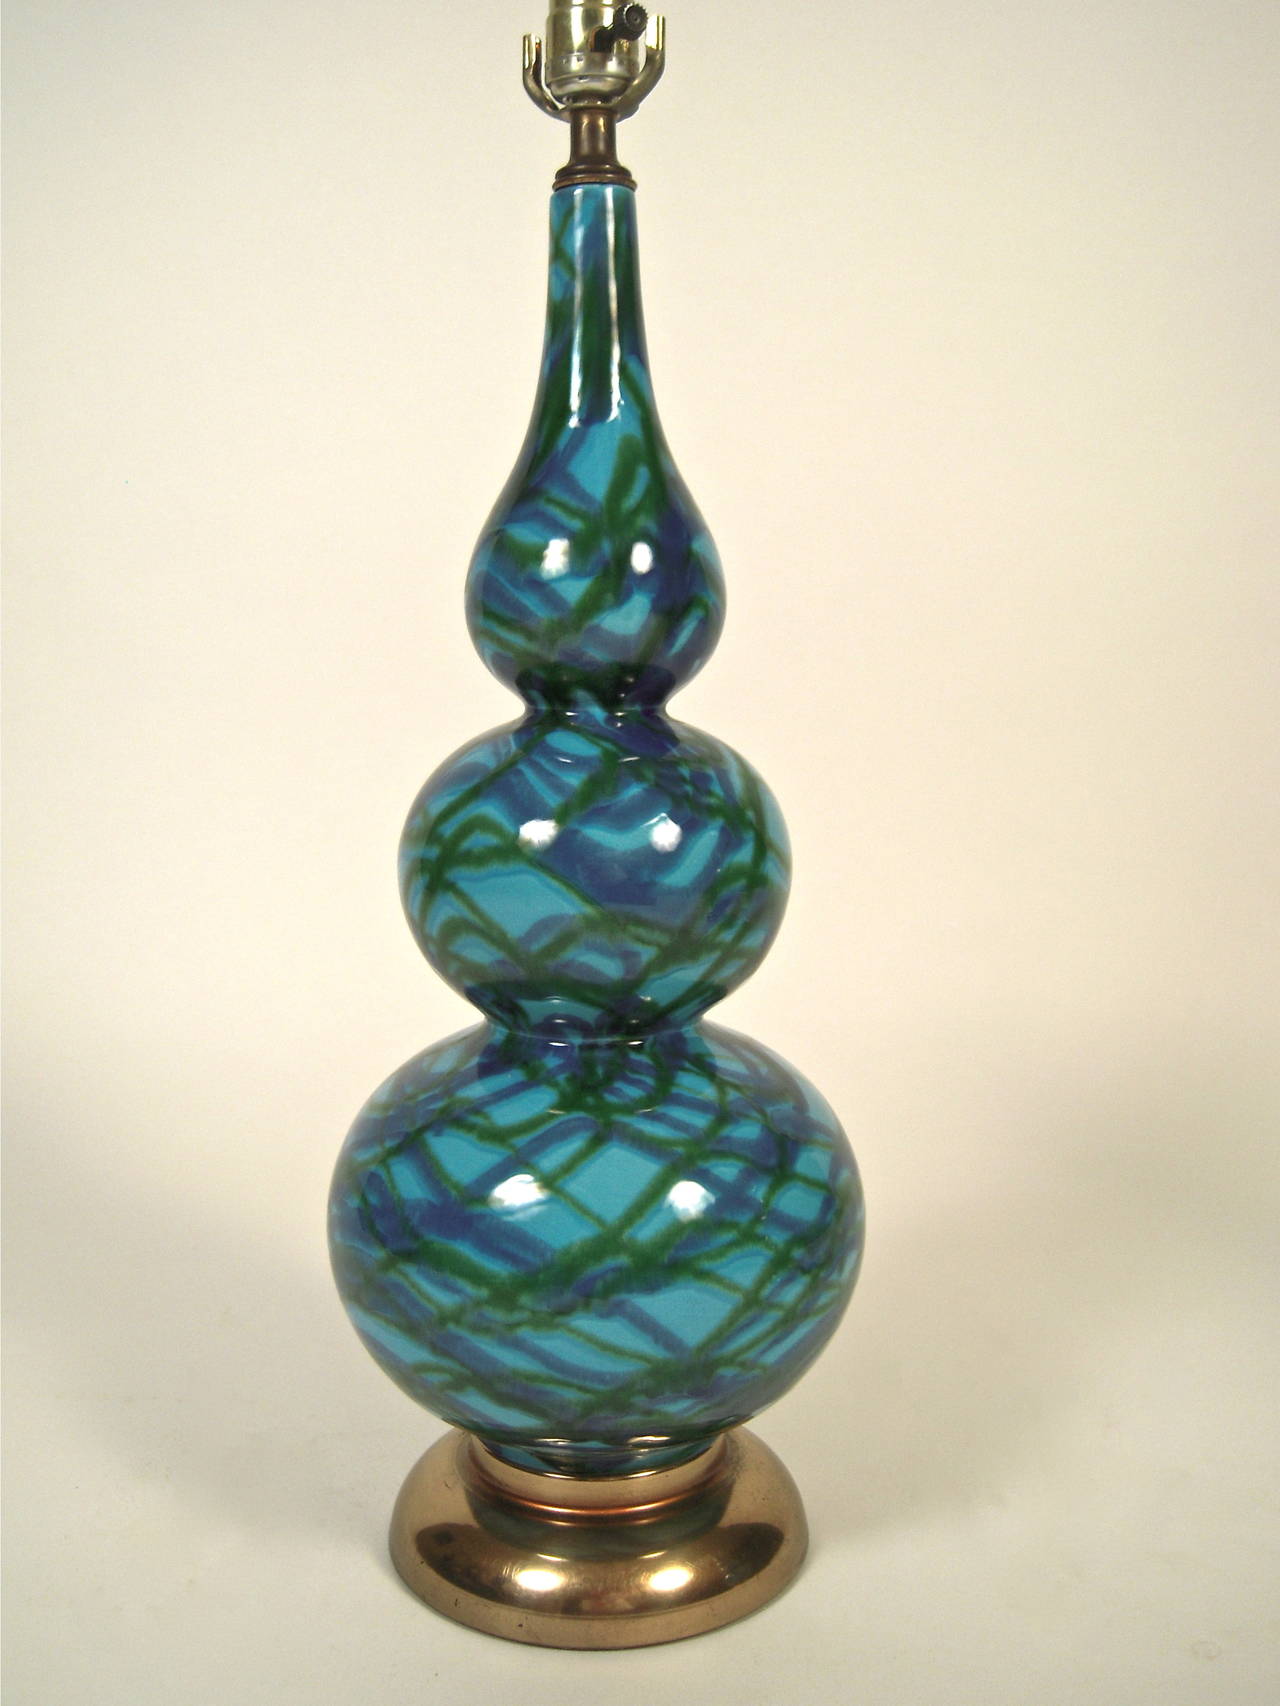 A pair of blue and green pottery lamps, circa 1960s, of triple gourd form, glazed with blue and green drip or painted decoration lines on a blue field, mounted on circular brass bases.